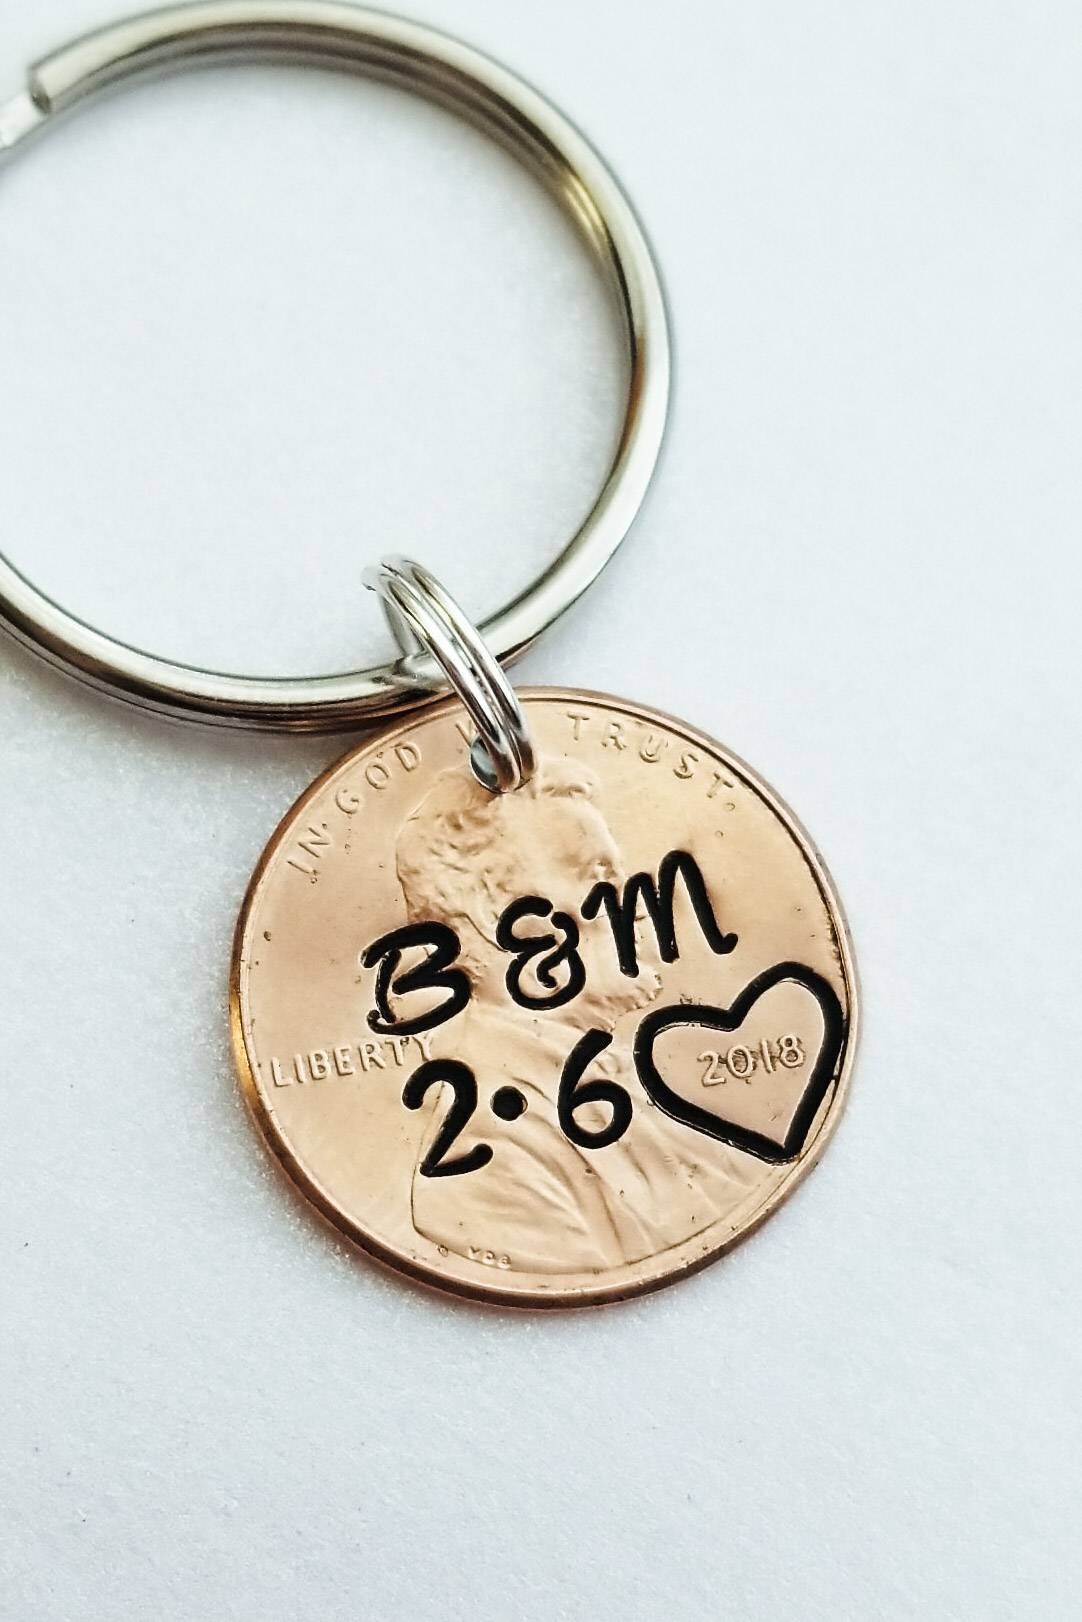 Personalized Penny Keychain-Anniversary Gift with Initials and Date stamped